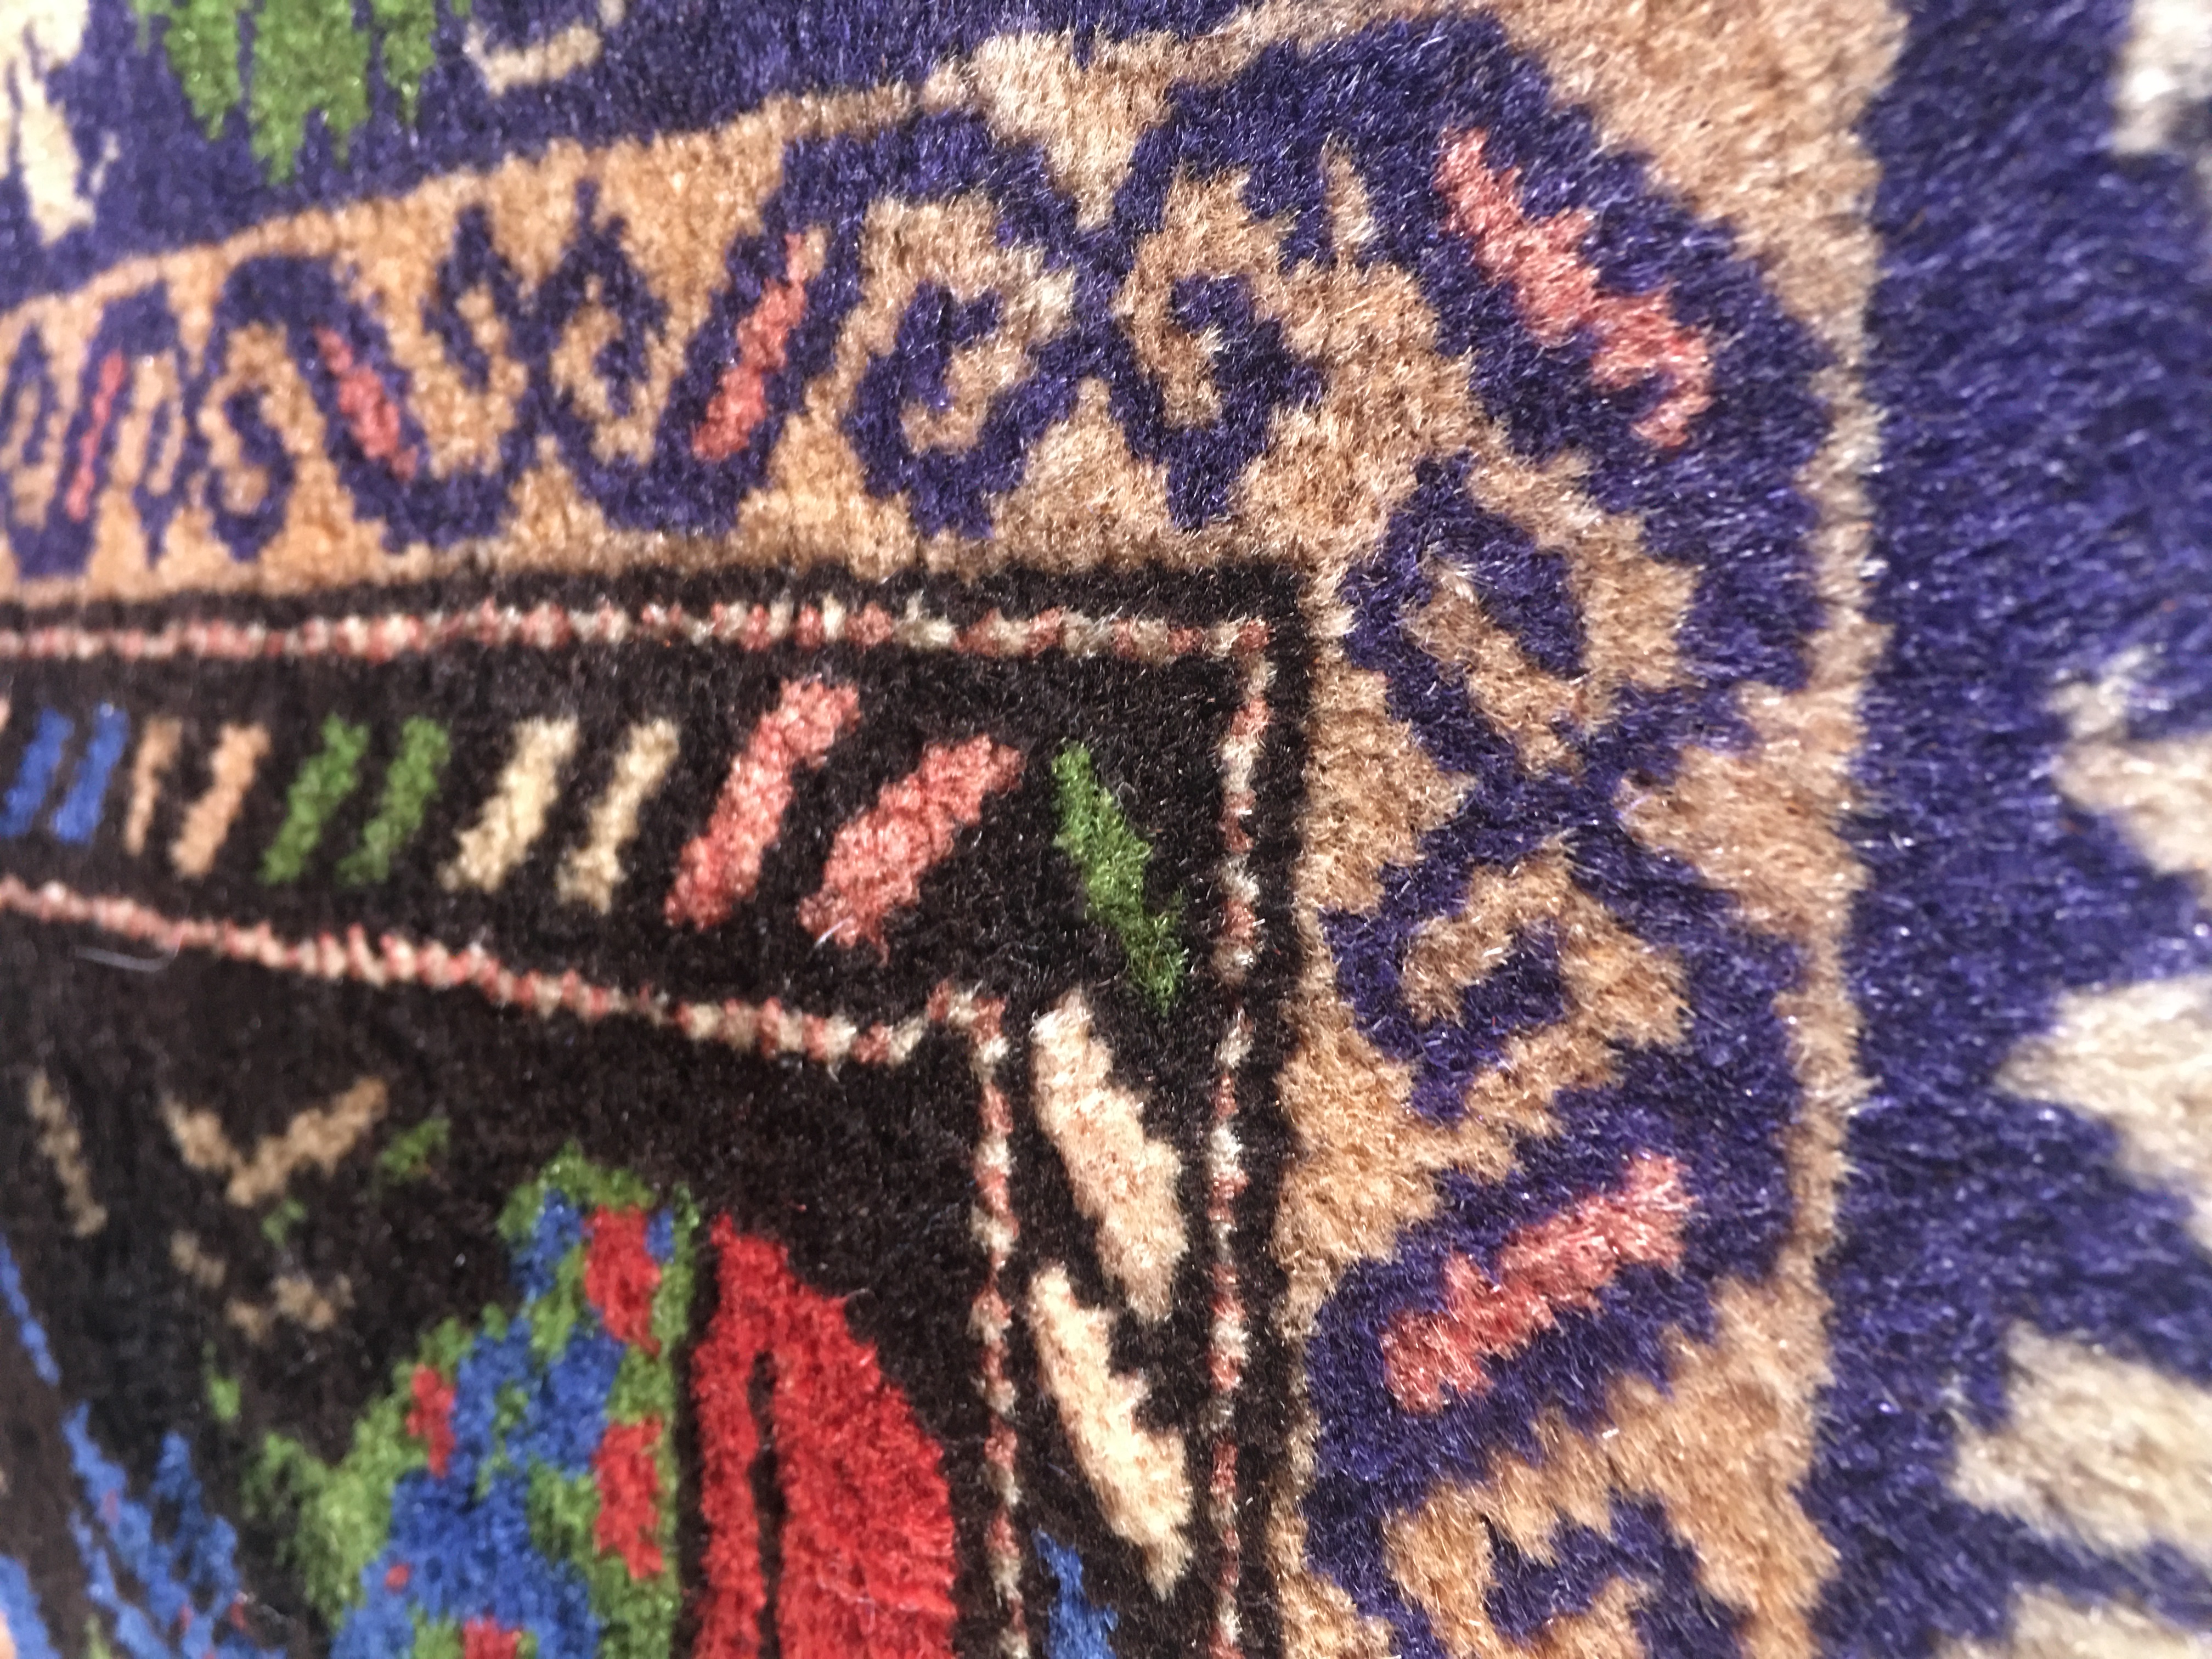 A close-up of the bottom right corner of the Shirin rug, demonstrating the wide range of colors used by the designer–weaver. Blue, brown, pink, green, red, and off-white are pictured